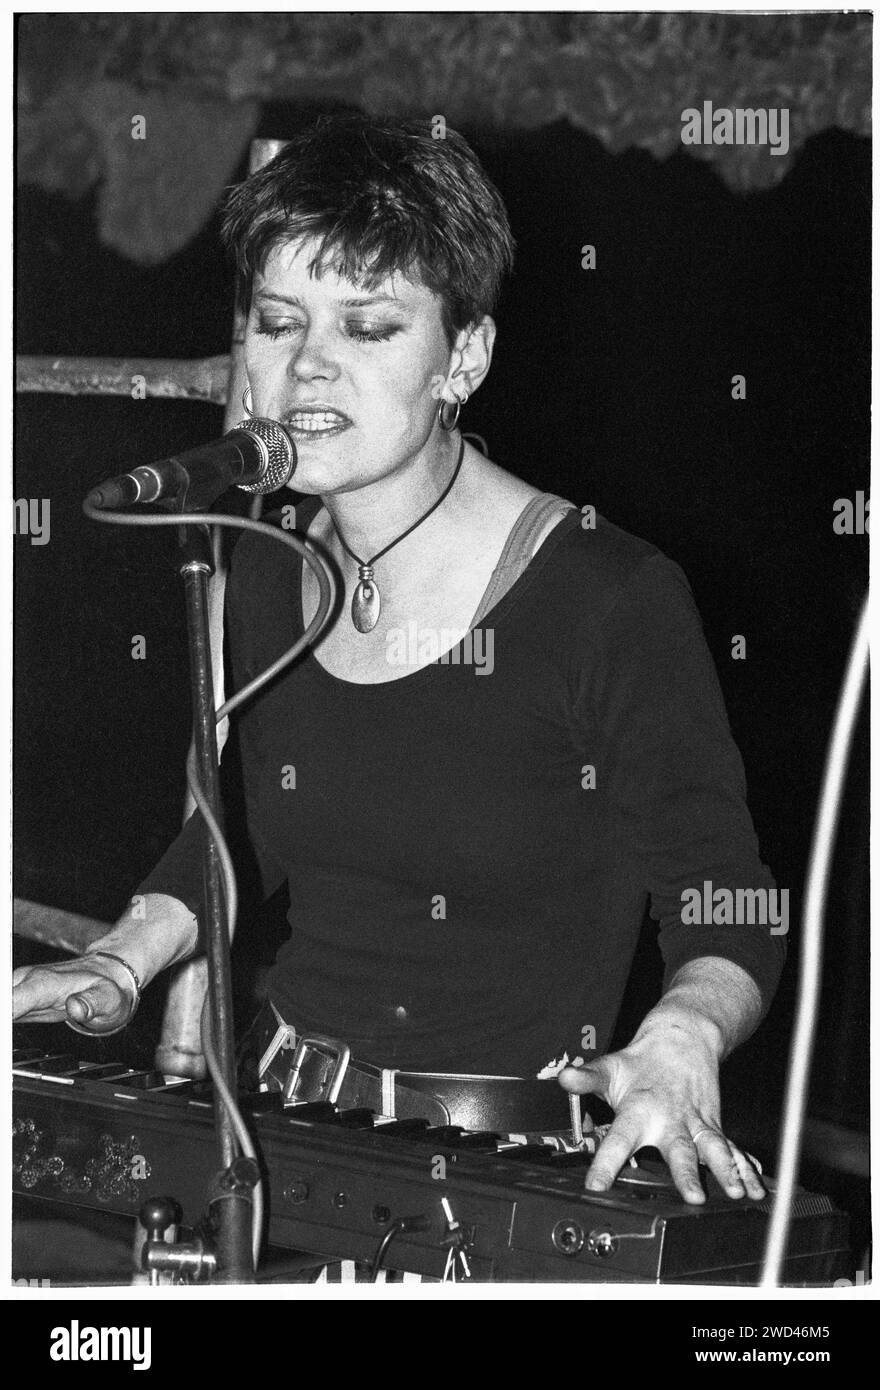 CATATONIA, CONCERT, 1994: Clancy Pegg original keyboard player of Catatonia at a very early gig playing live at the Legendary TJ’s in Newport, Wales, UK on 9 April 1994. Photo: Rob Watkins. INFO: Catatonia, a Welsh alternative rock band in the '90s, fronted by Cerys Matthews, gained fame with hits like 'Mulder and Scully' and 'Road Rage.' Their eclectic sound, blending pop, rock, and folk, solidified their place in the Britpop era, showcasing Matthews' distinctive vocals. Stock Photo